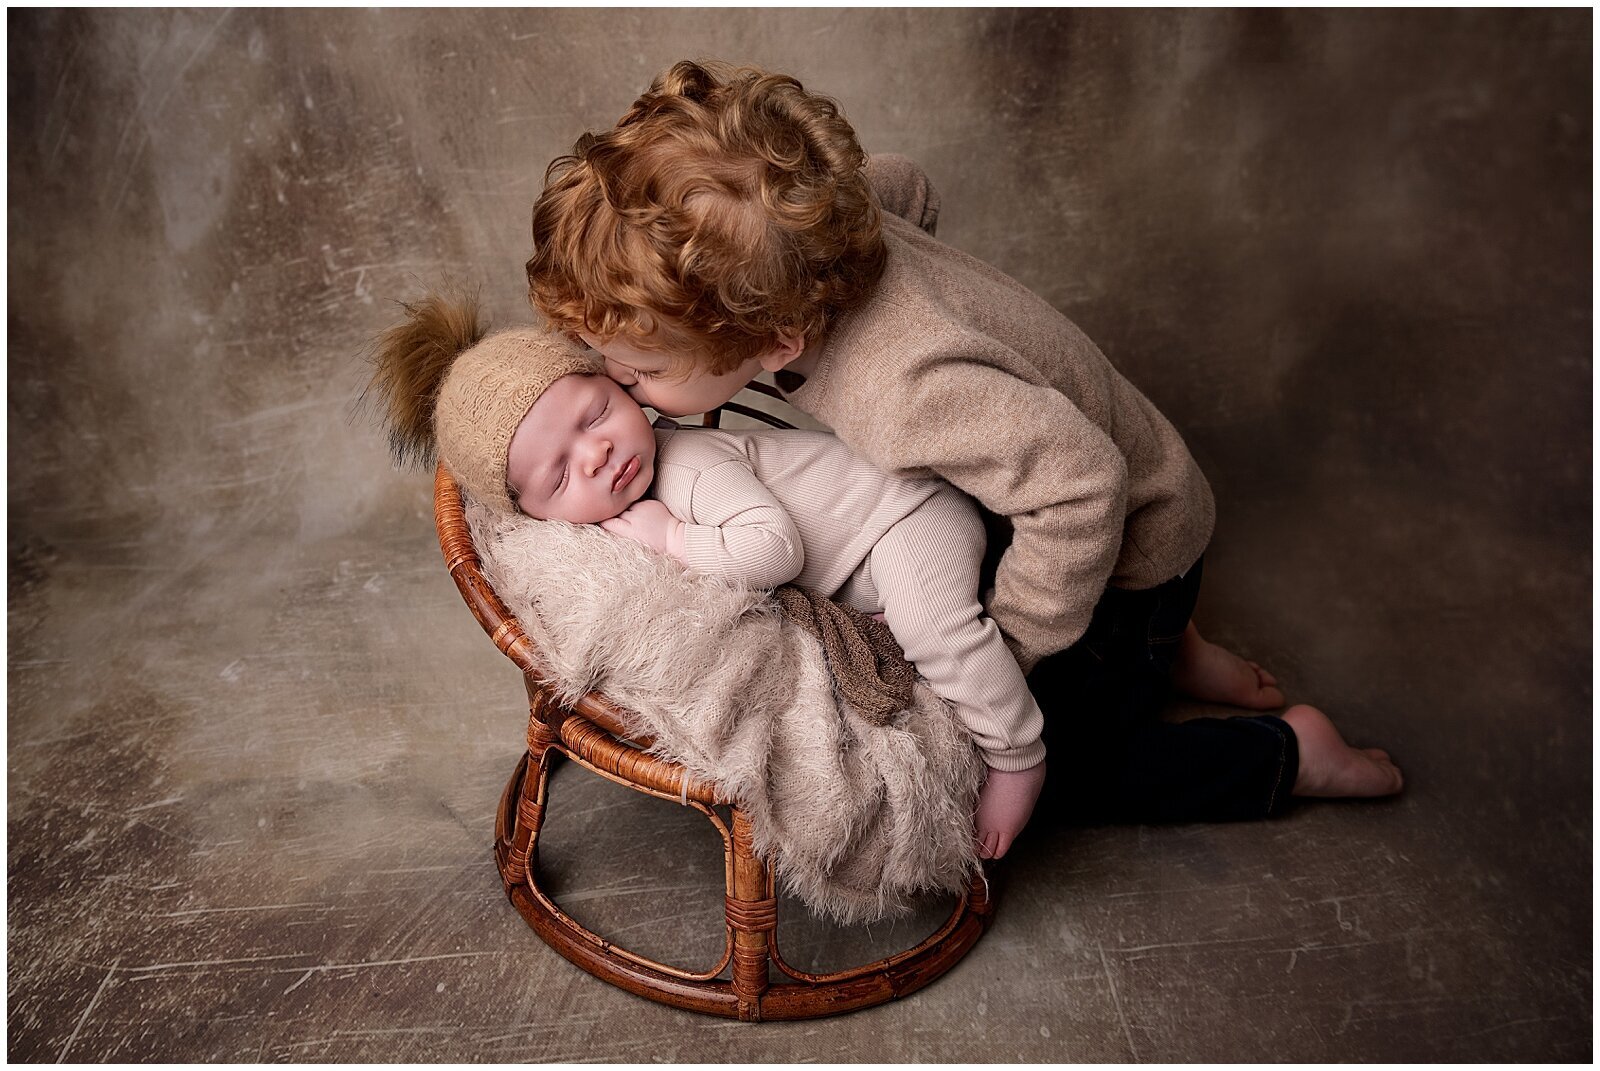 Young toddler kissing new baby brother on the  side of the face, who is sleeping in a papasan chair.